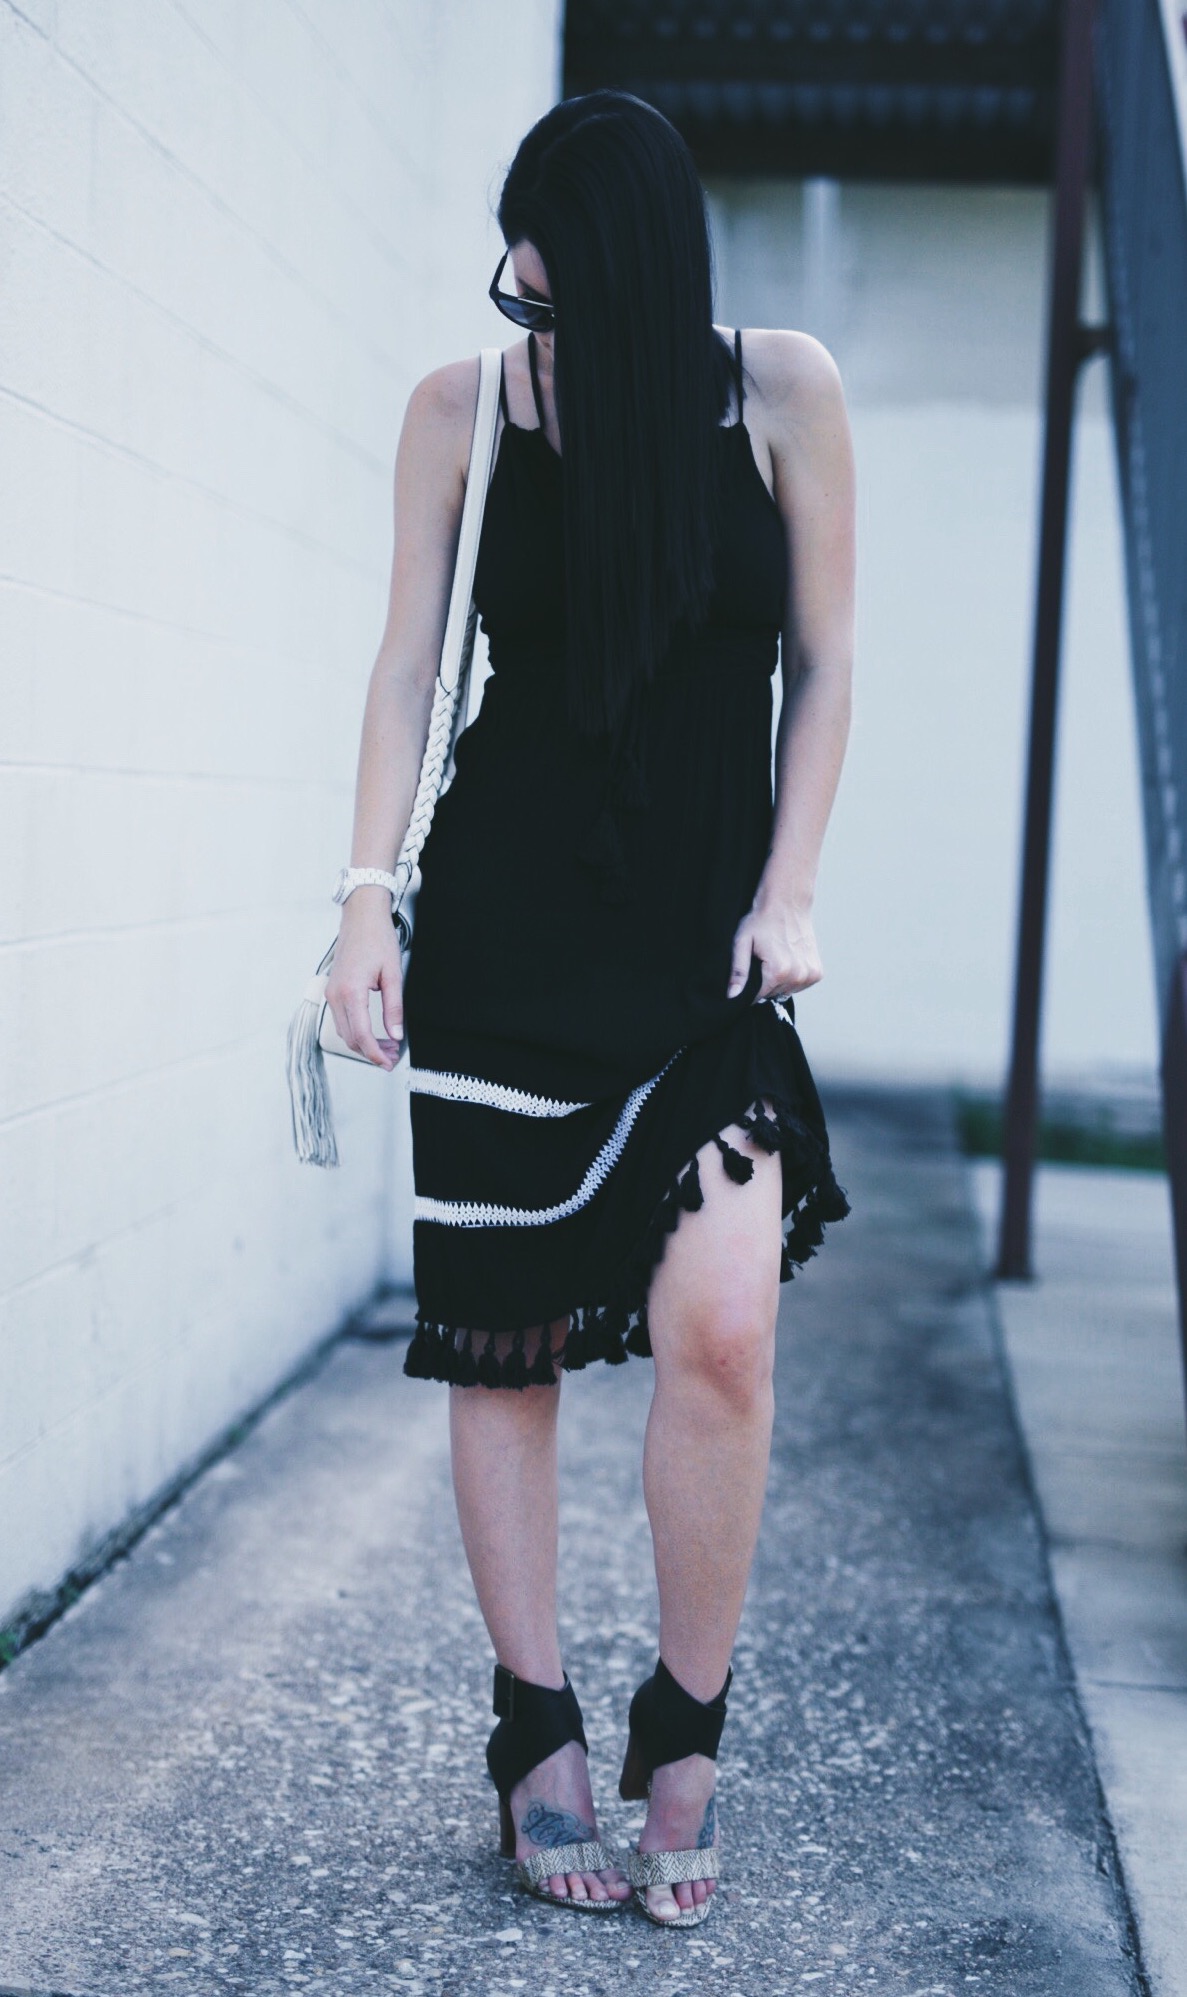 Tassle Black Dress | summer fashion tips | summer outfit ideas | summer style tips | what to wear for summer | warm weather fashion | fashion for summer | style tips for summer | outfit ideas for summer || Dressed to Kill